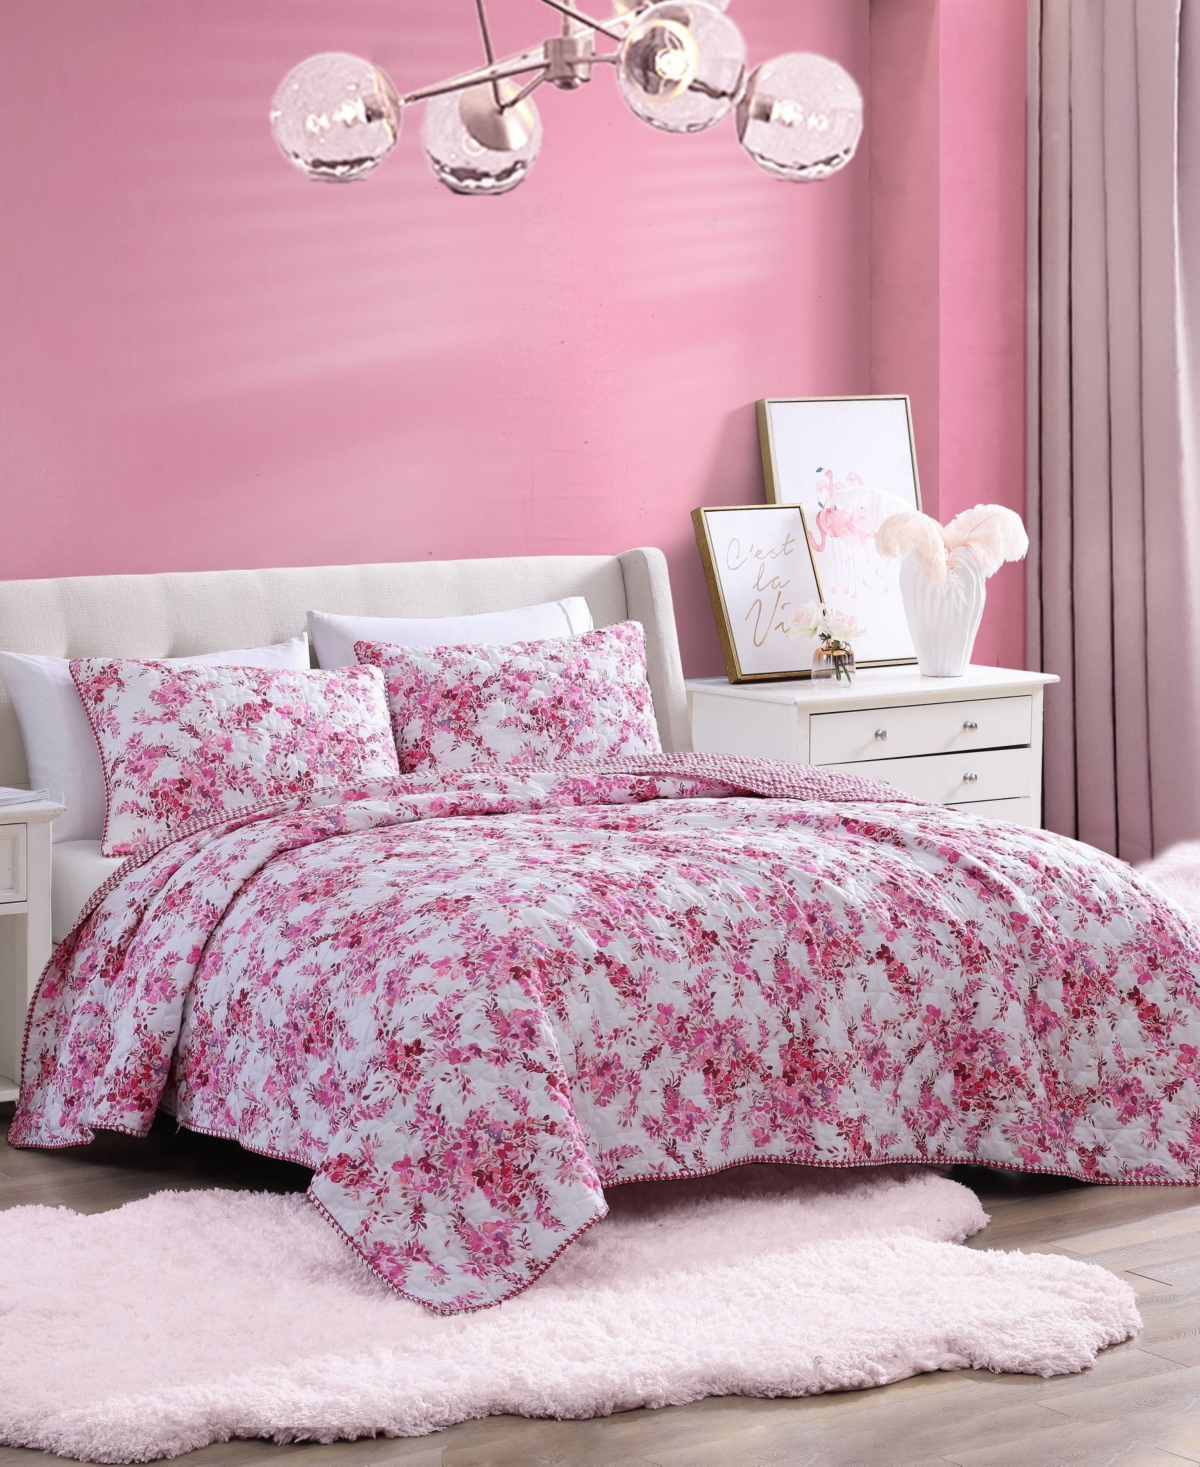 Betsey Johnson 3 Piece Floral Vineyard Quilt Set, Full/queen In Berry Pink